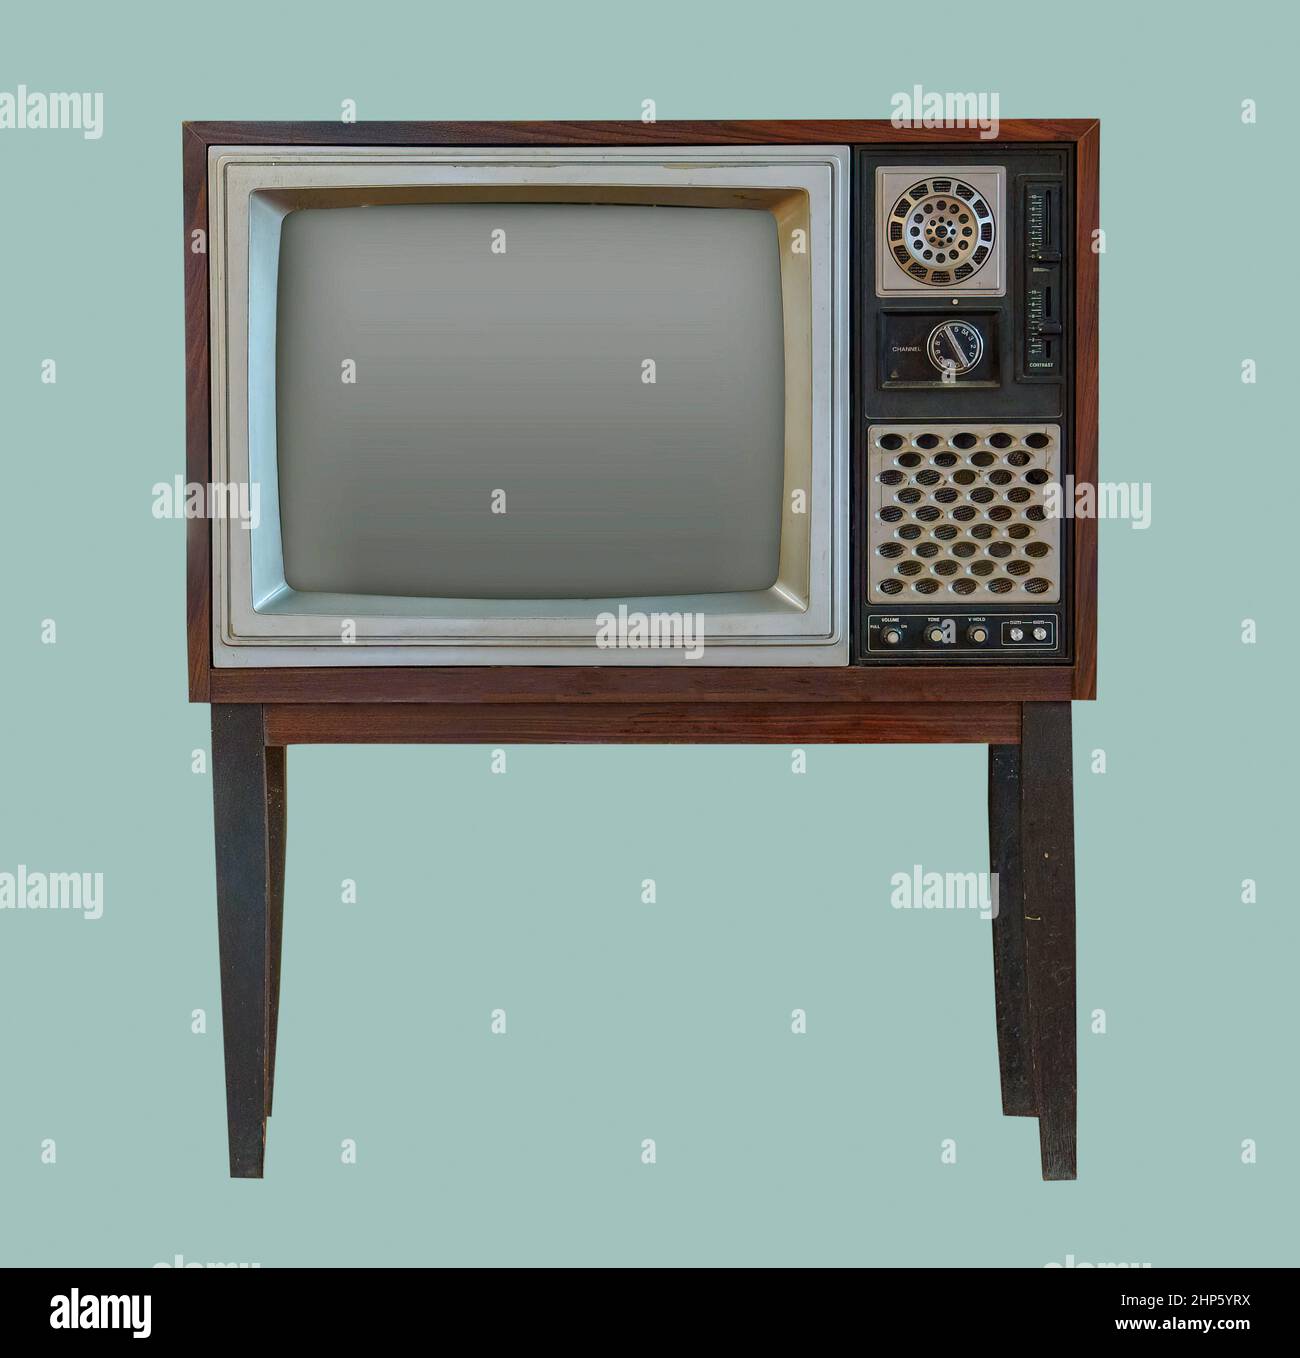 Vintage TV. Old retro TV set in wooden cabinet on isolated green background with clipping path. Stock Photo